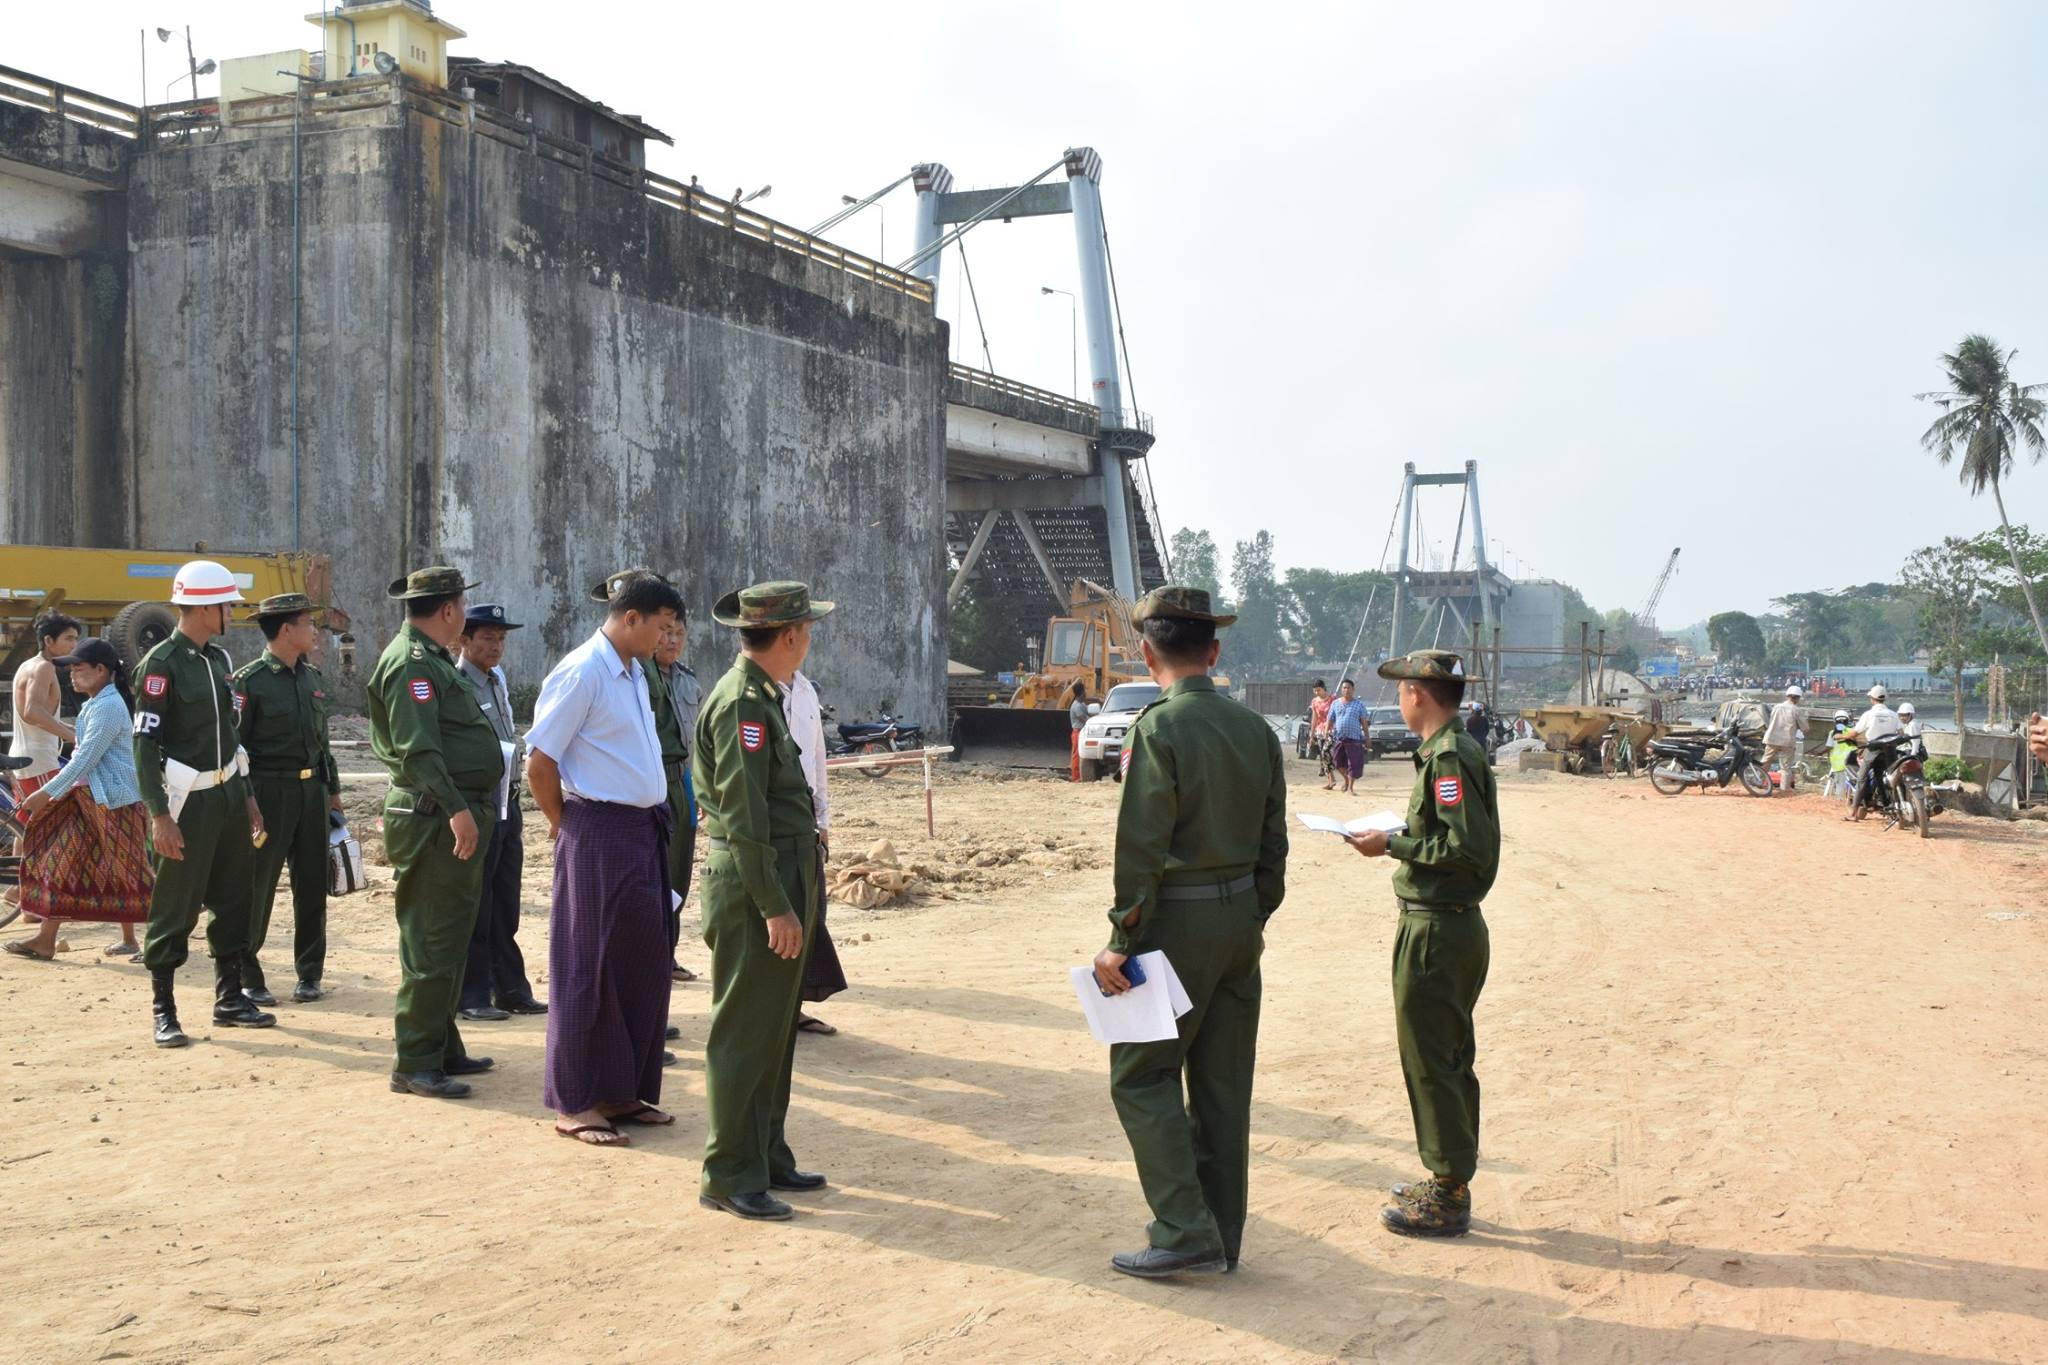 Myanmar military officers inspect a bridge that collapsed in Myaungmya, Ayeyawady Region, on April 1, 2018., killing at least one person. Photo: Office of the Commander-in-Chief